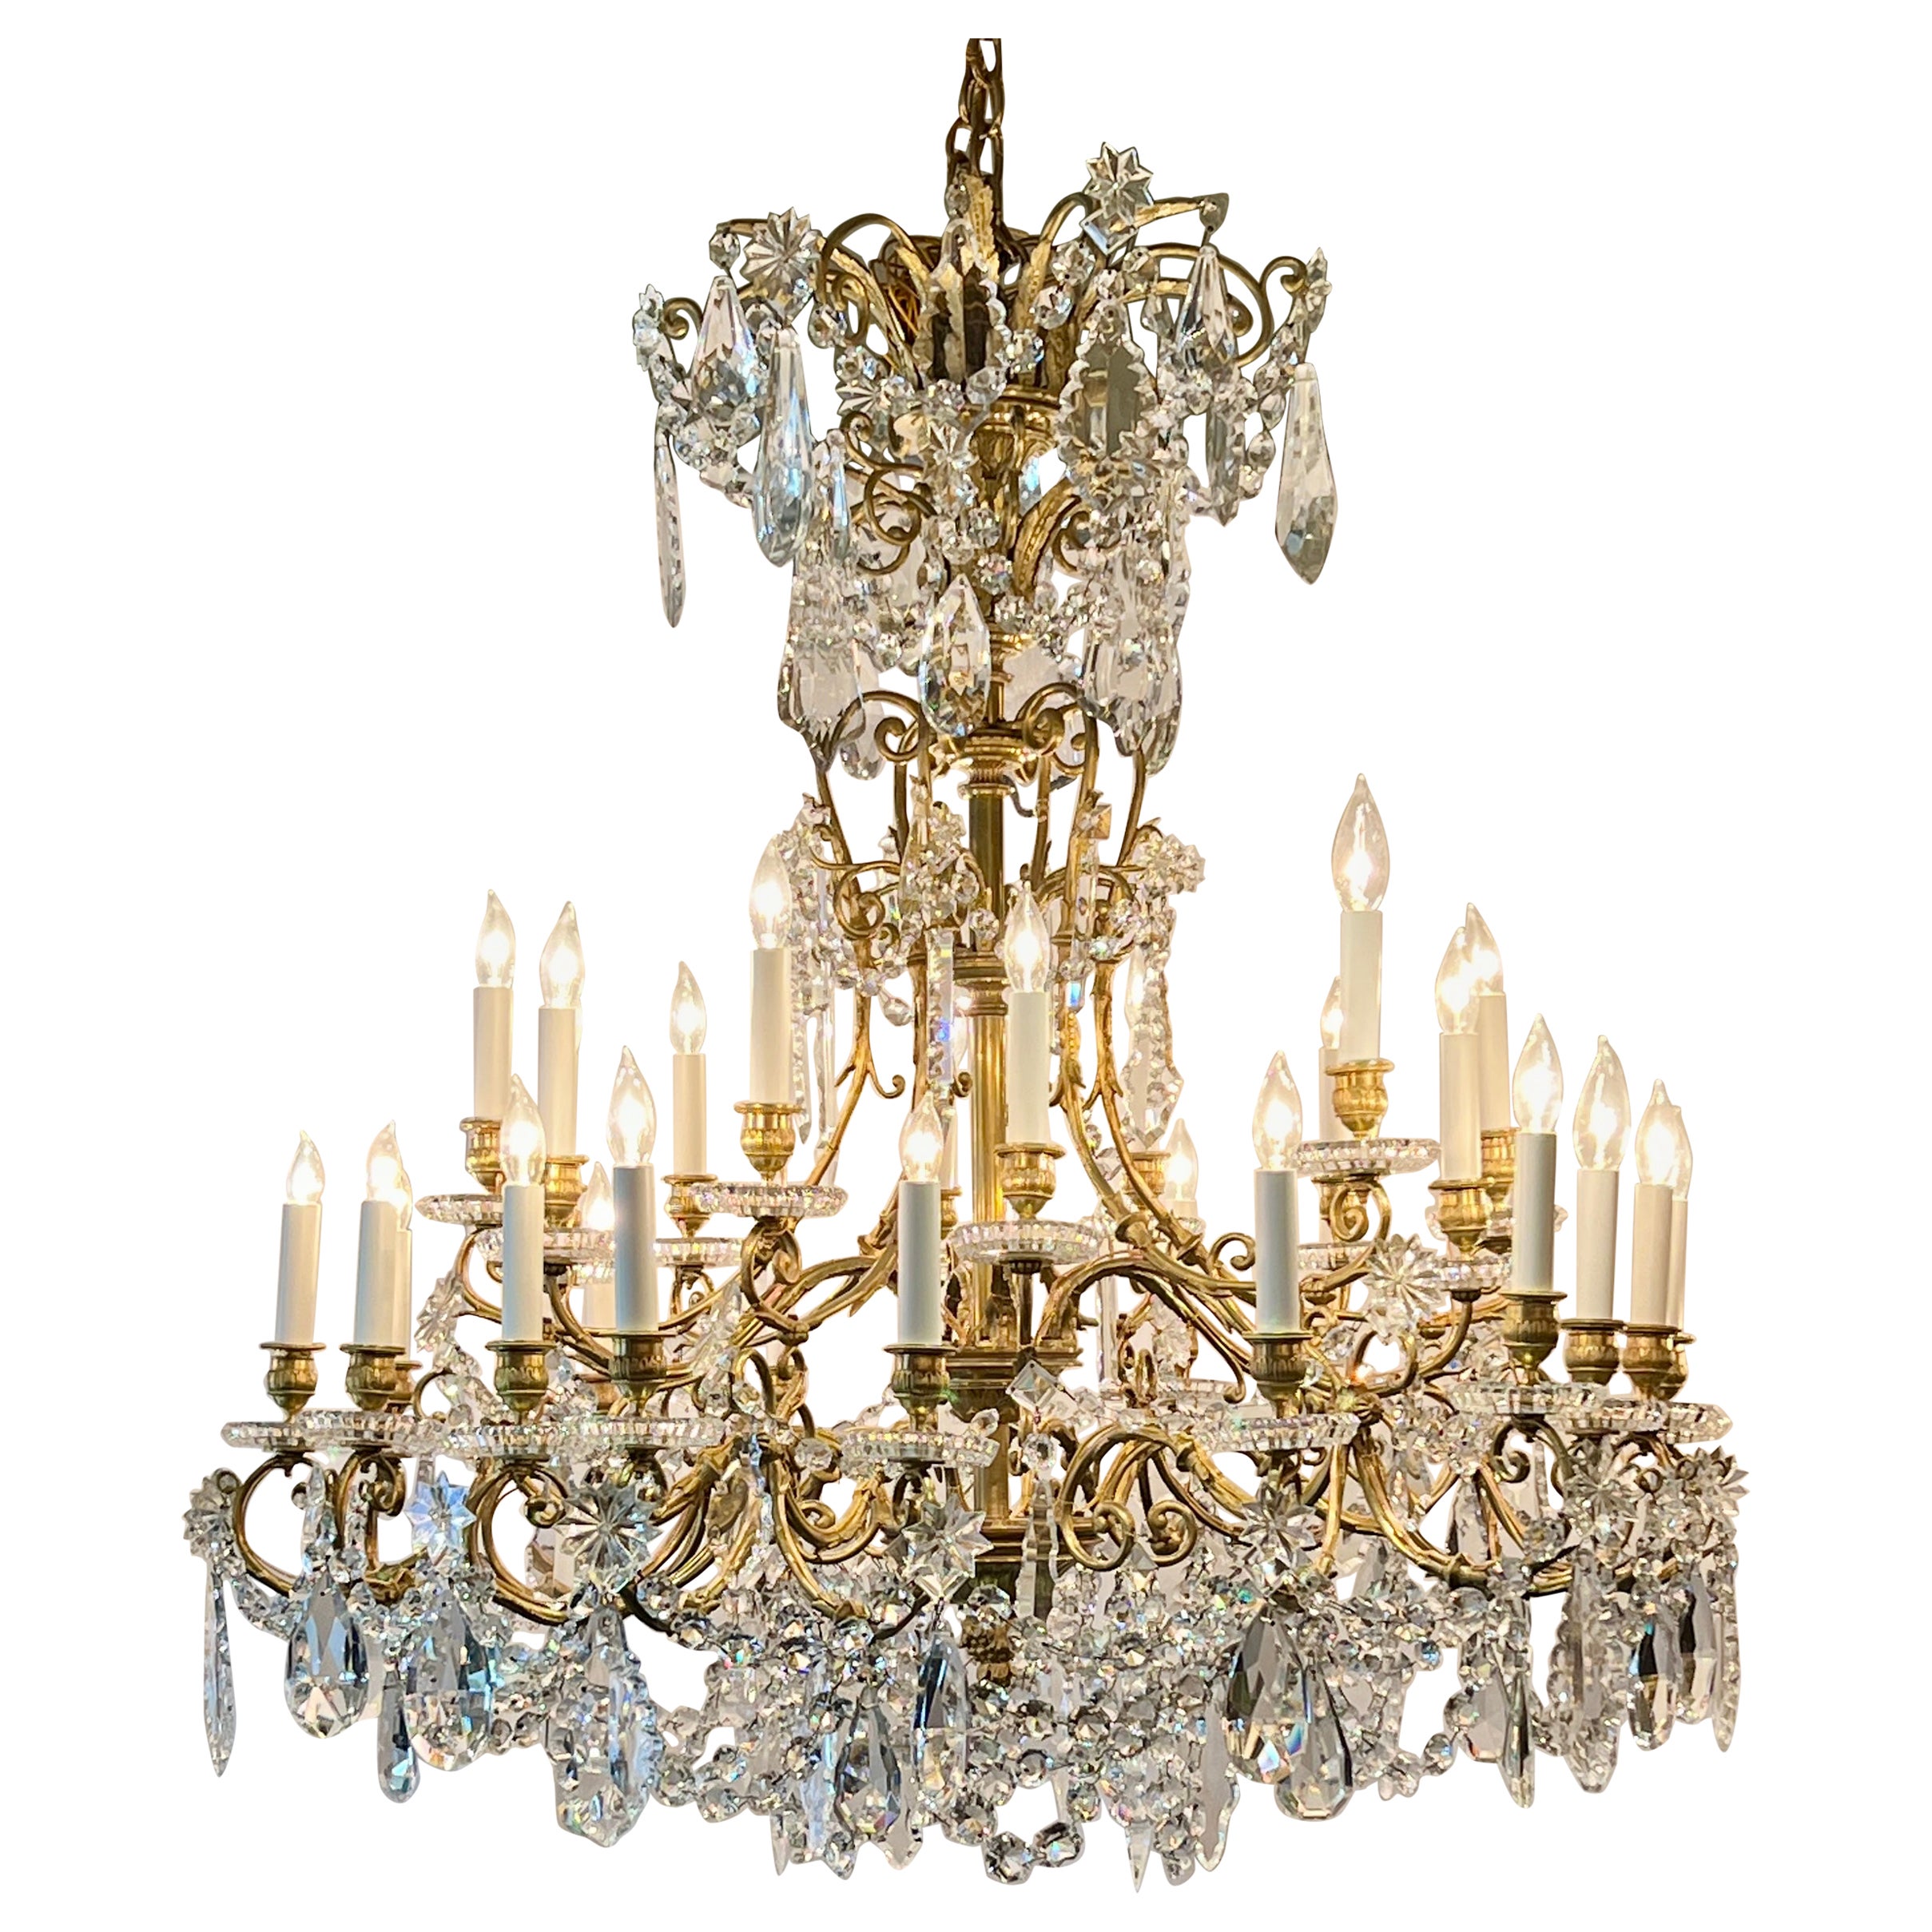 Antique French Gold Bronze & Baccarat Cut Crystal 30 Light Chandelier Circa 1910